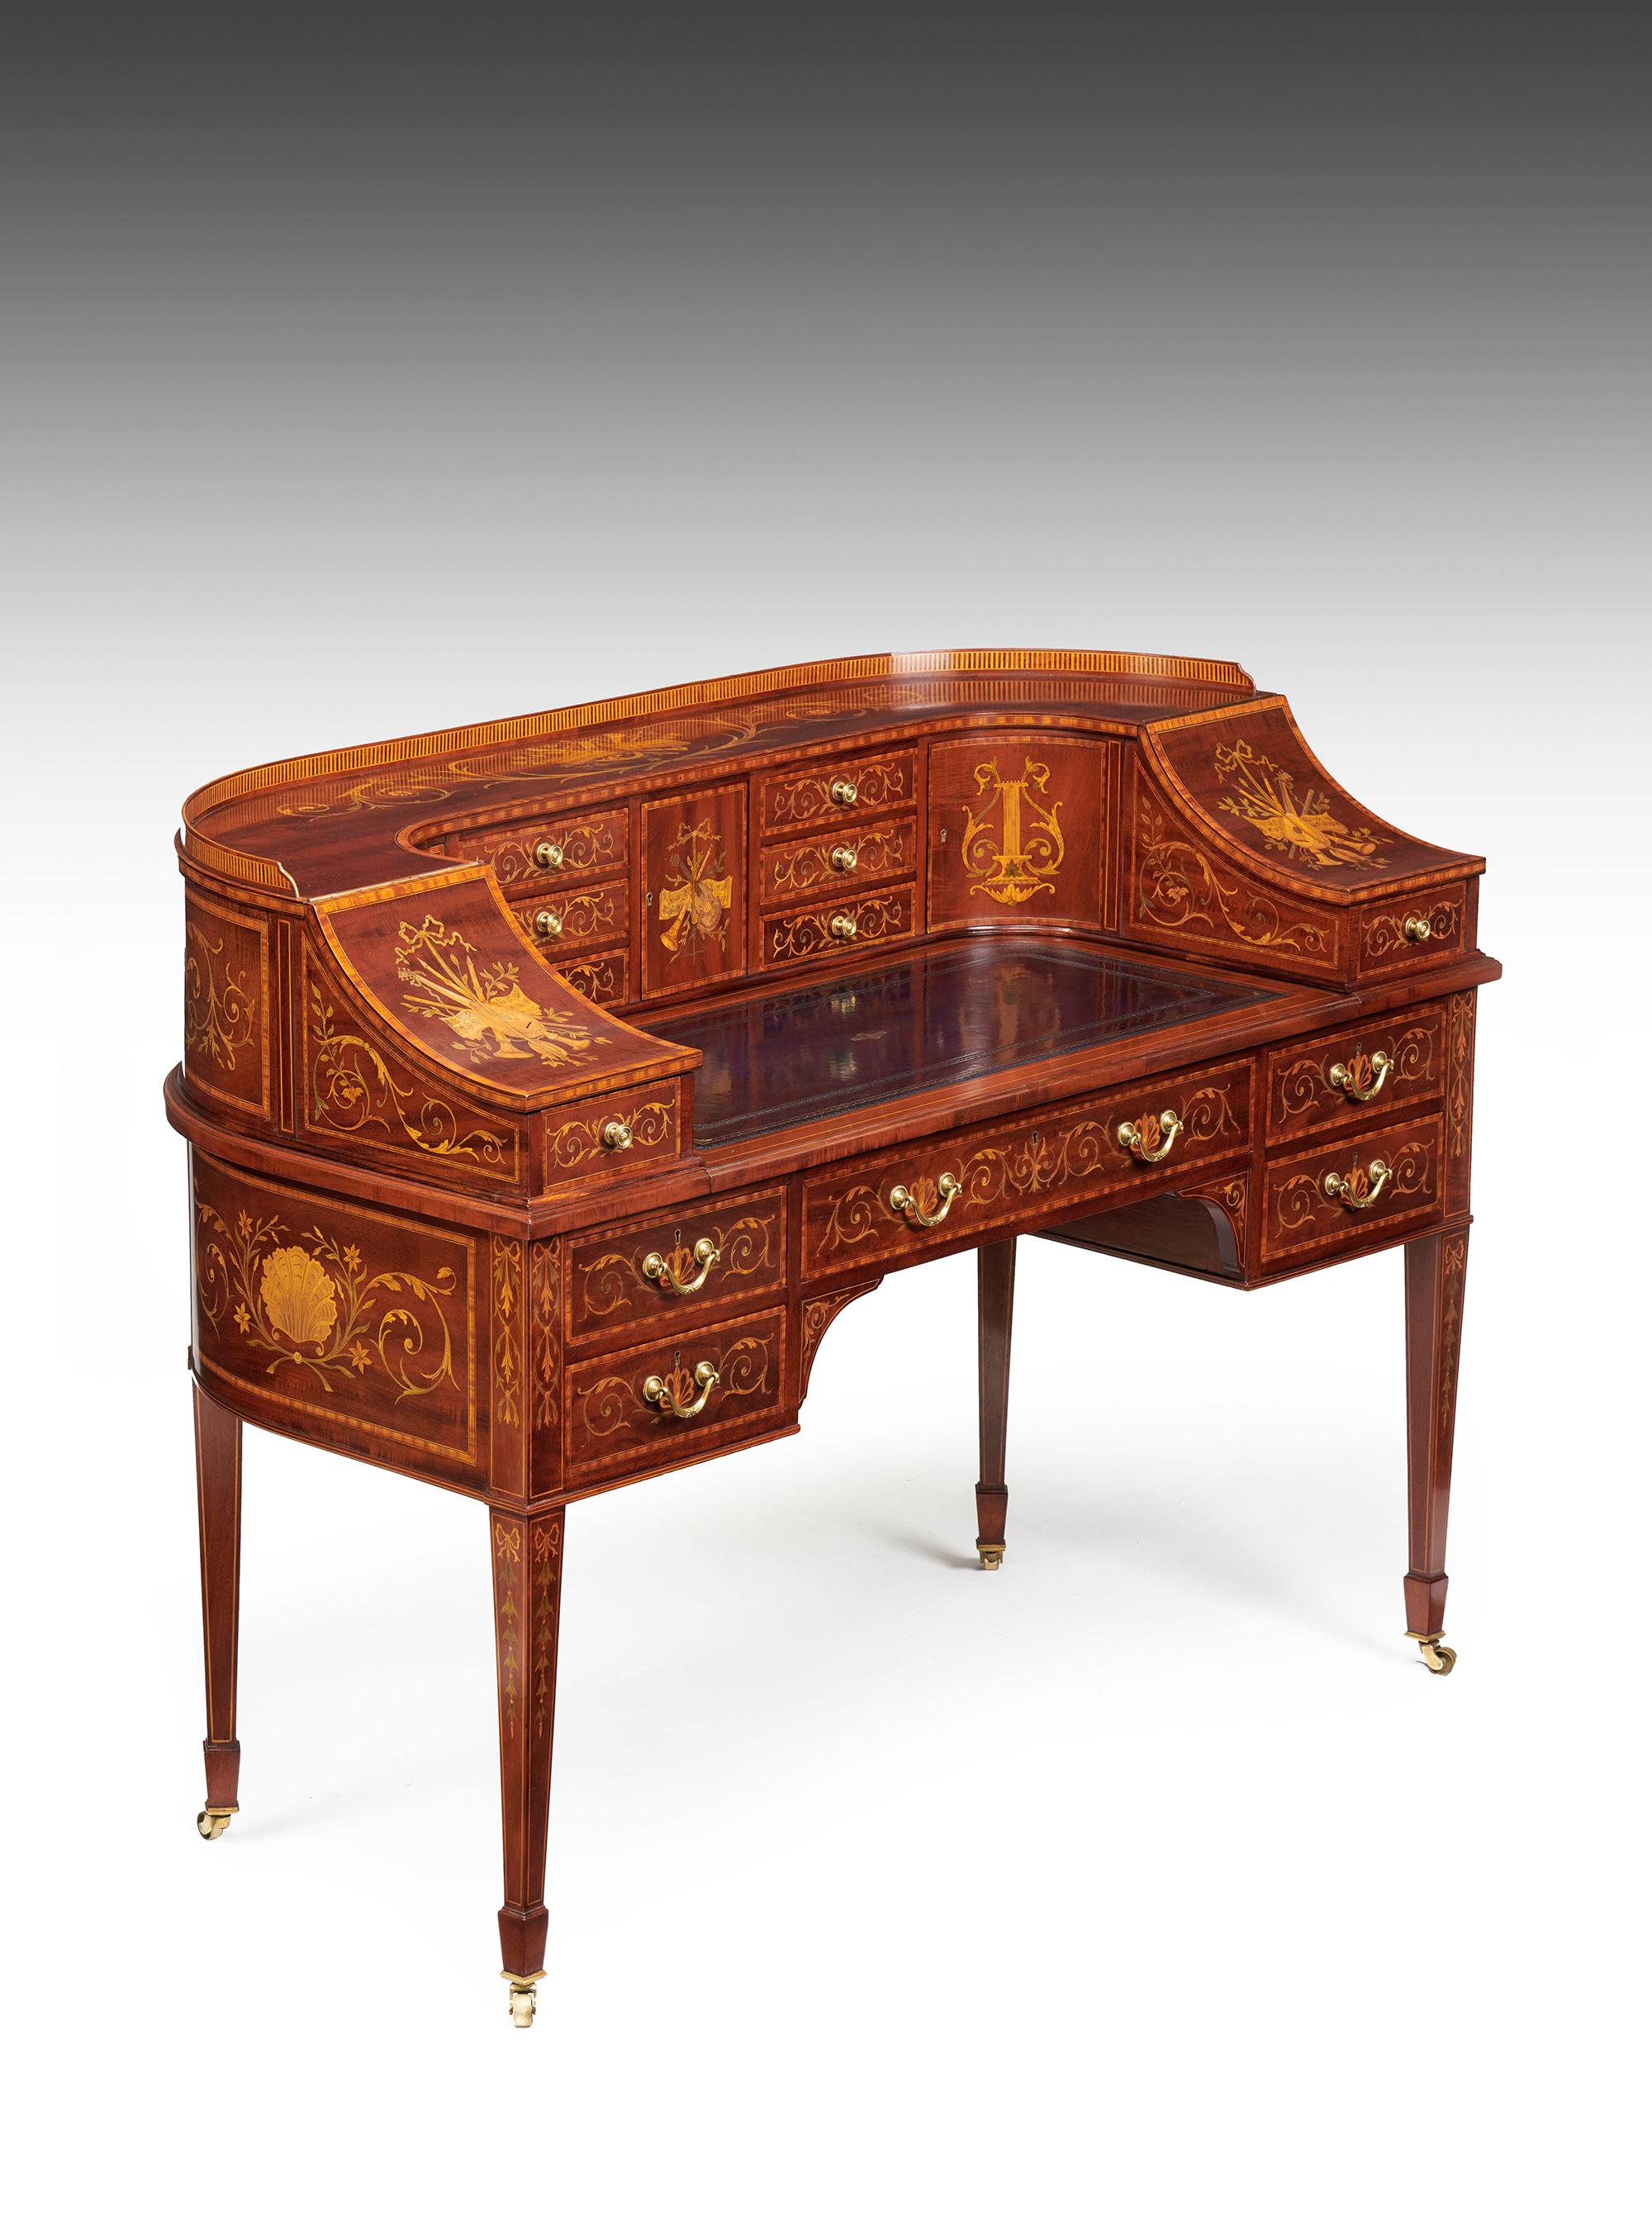 An exhibition quality mahogany, satinwood and marquetry inlaid 19th century Carlton house desk made by the renowned London firm and suppliers to Royalty, Maple & Co. stamped to the central drawer.

English, London made, circa 1880-1900.

Of